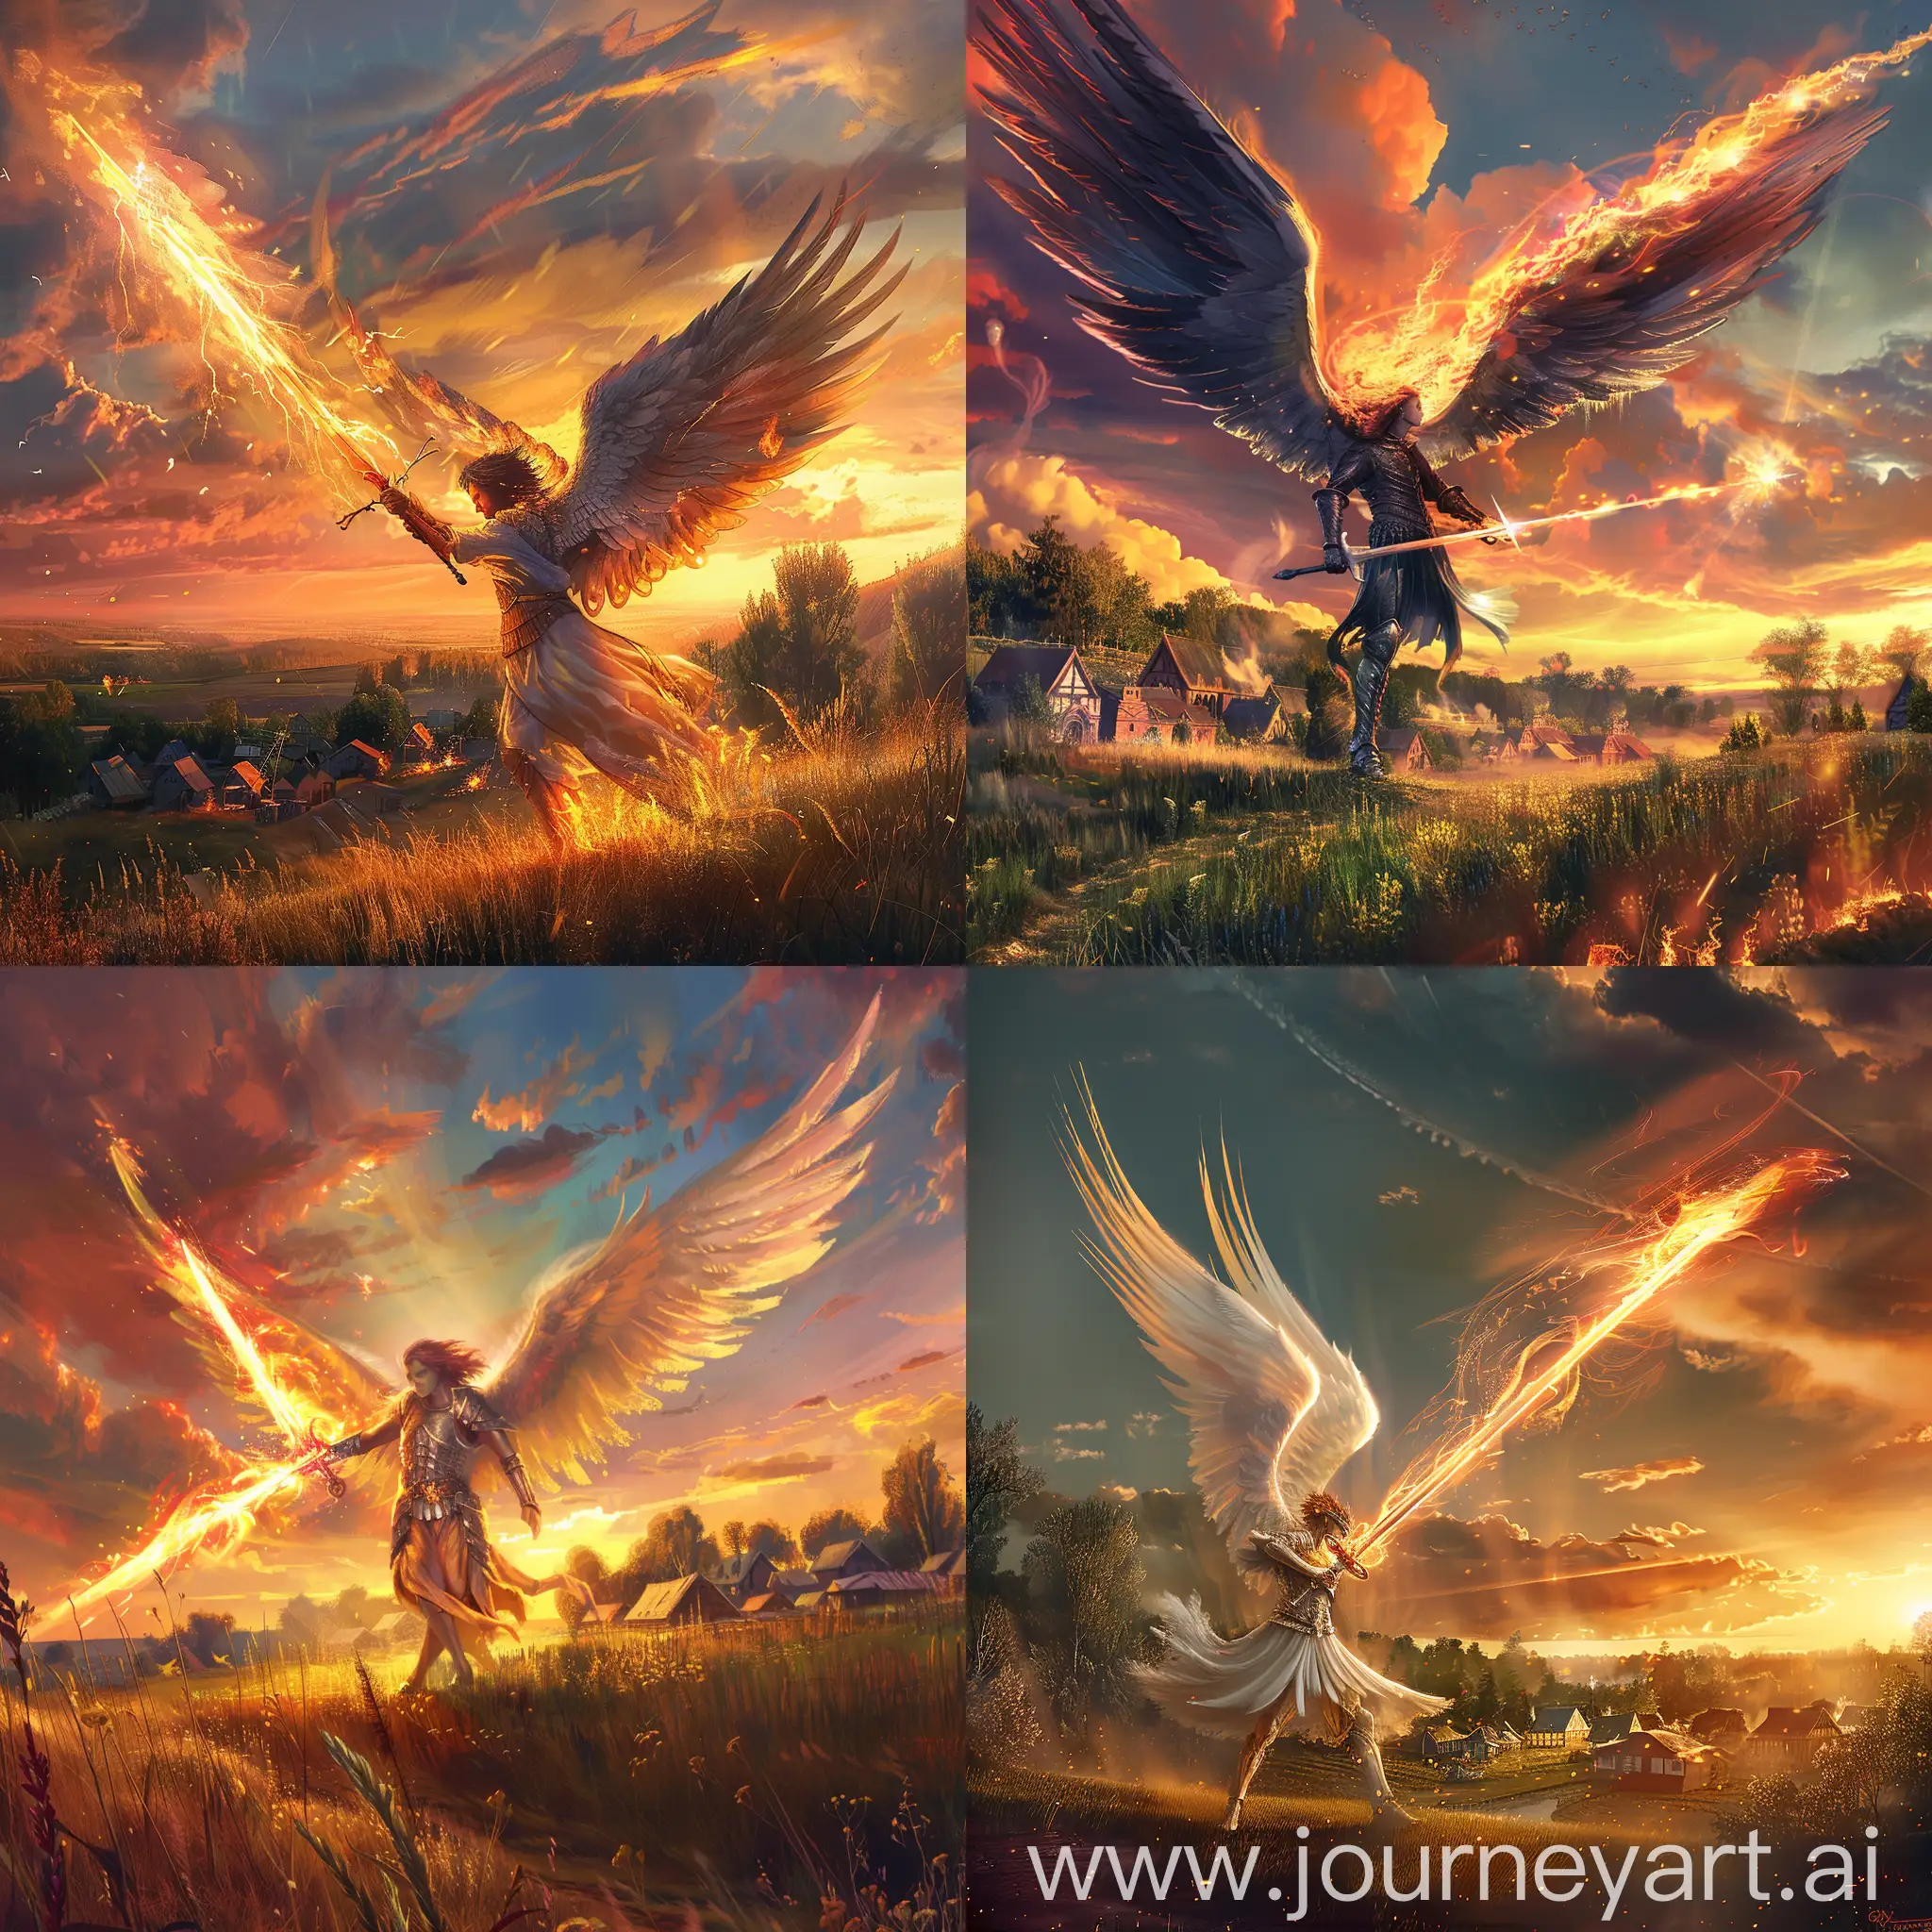 In an open field, under a twilight sky, an angel descends from the heavens with his fiery sword blazing. His wings shine with a divine light as he prepares to land in front of a small village.